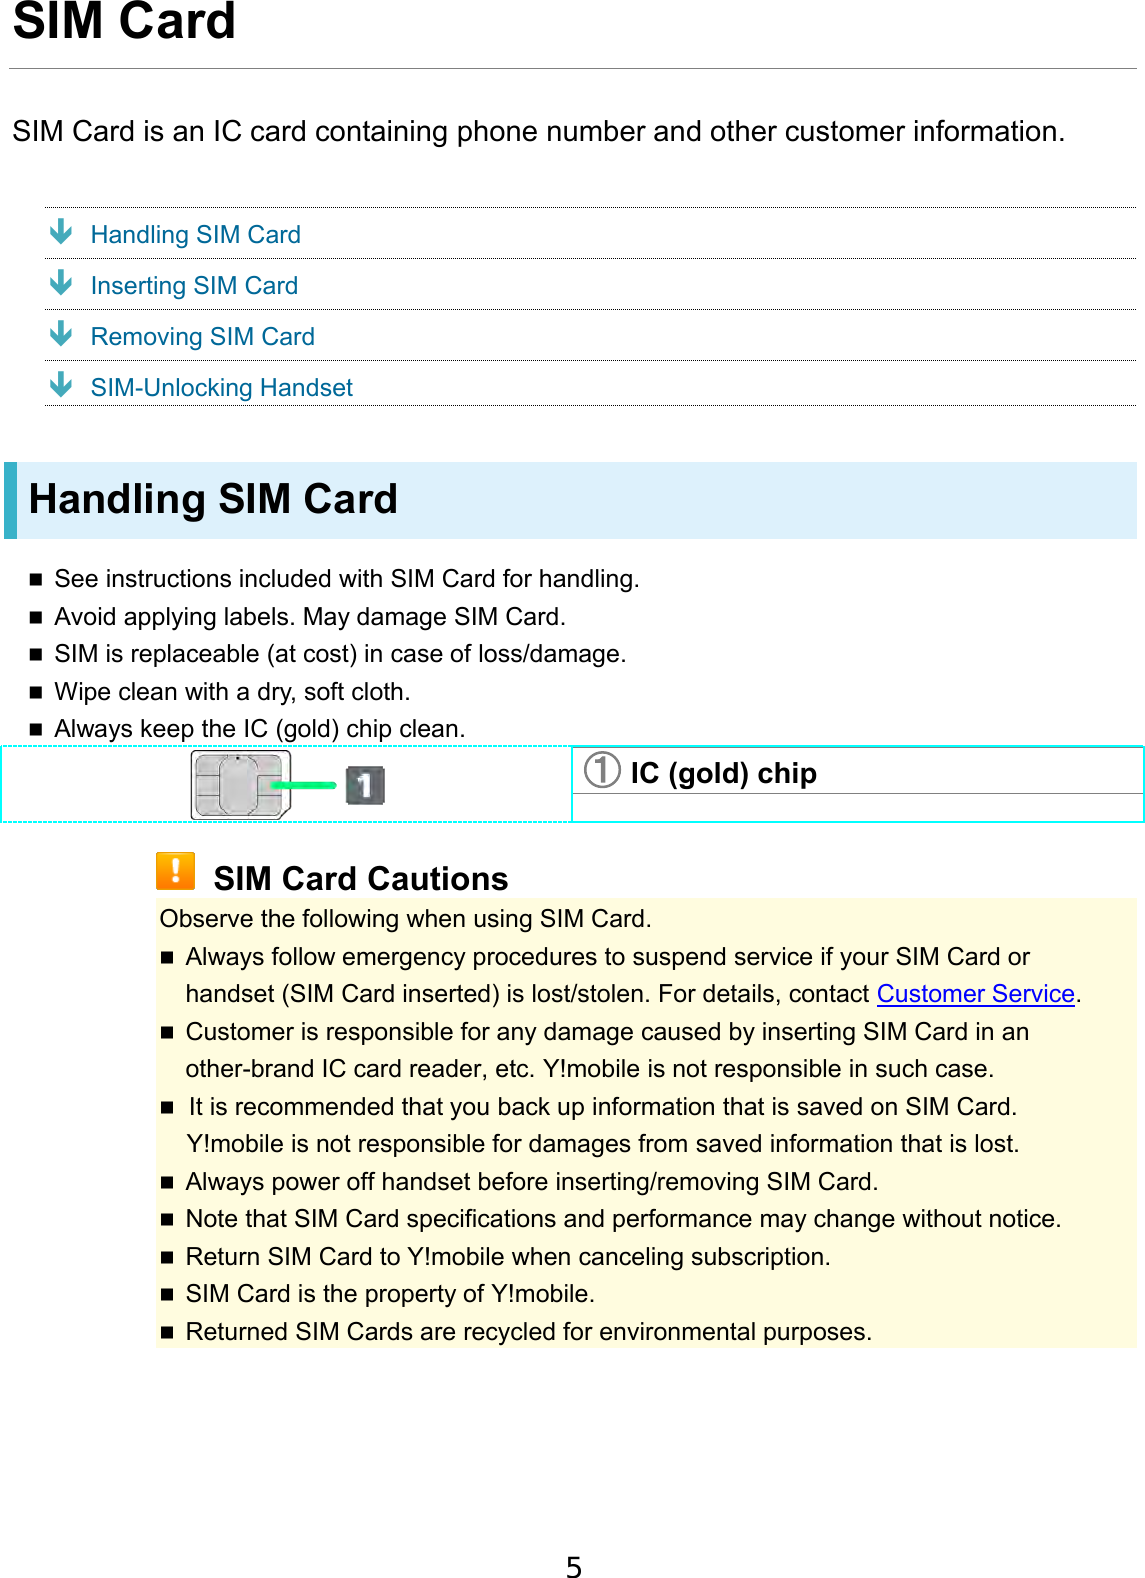 SIM Card SIM Card is an IC card containing phone number and other customer information.  Handling SIM Card Inserting SIM Card Removing SIM Card SIM-Unlocking Handset Handling SIM Card See instructions included with SIM Card for handling.Avoid applying labels. May damage SIM Card.SIM is replaceable (at cost) in case of loss/damage.Wipe clean with a dry, soft cloth.Always keep the IC (gold) chip clean.①IC (gold) chipSIM Card Cautions Observe the following when using SIM Card. Always follow emergency procedures to suspend service if your SIM Card orhandset (SIM Card inserted) is lost/stolen. For details, contact Customer Service.Customer is responsible for any damage caused by inserting SIM Card in an other-brand IC card reader, etc. Y!mobile is not responsible in such case.It is recommended that you back up information that is saved on SIM Card. Y!mobile is not responsible for damages from saved information that is lost.Always power off handset before inserting/removing SIM Card.Note that SIM Card specifications and performance may change without notice.Return SIM Card to Y!mobile when canceling subscription.SIM Card is the property of Y!mobile.Returned SIM Cards are recycled for environmental purposes.5